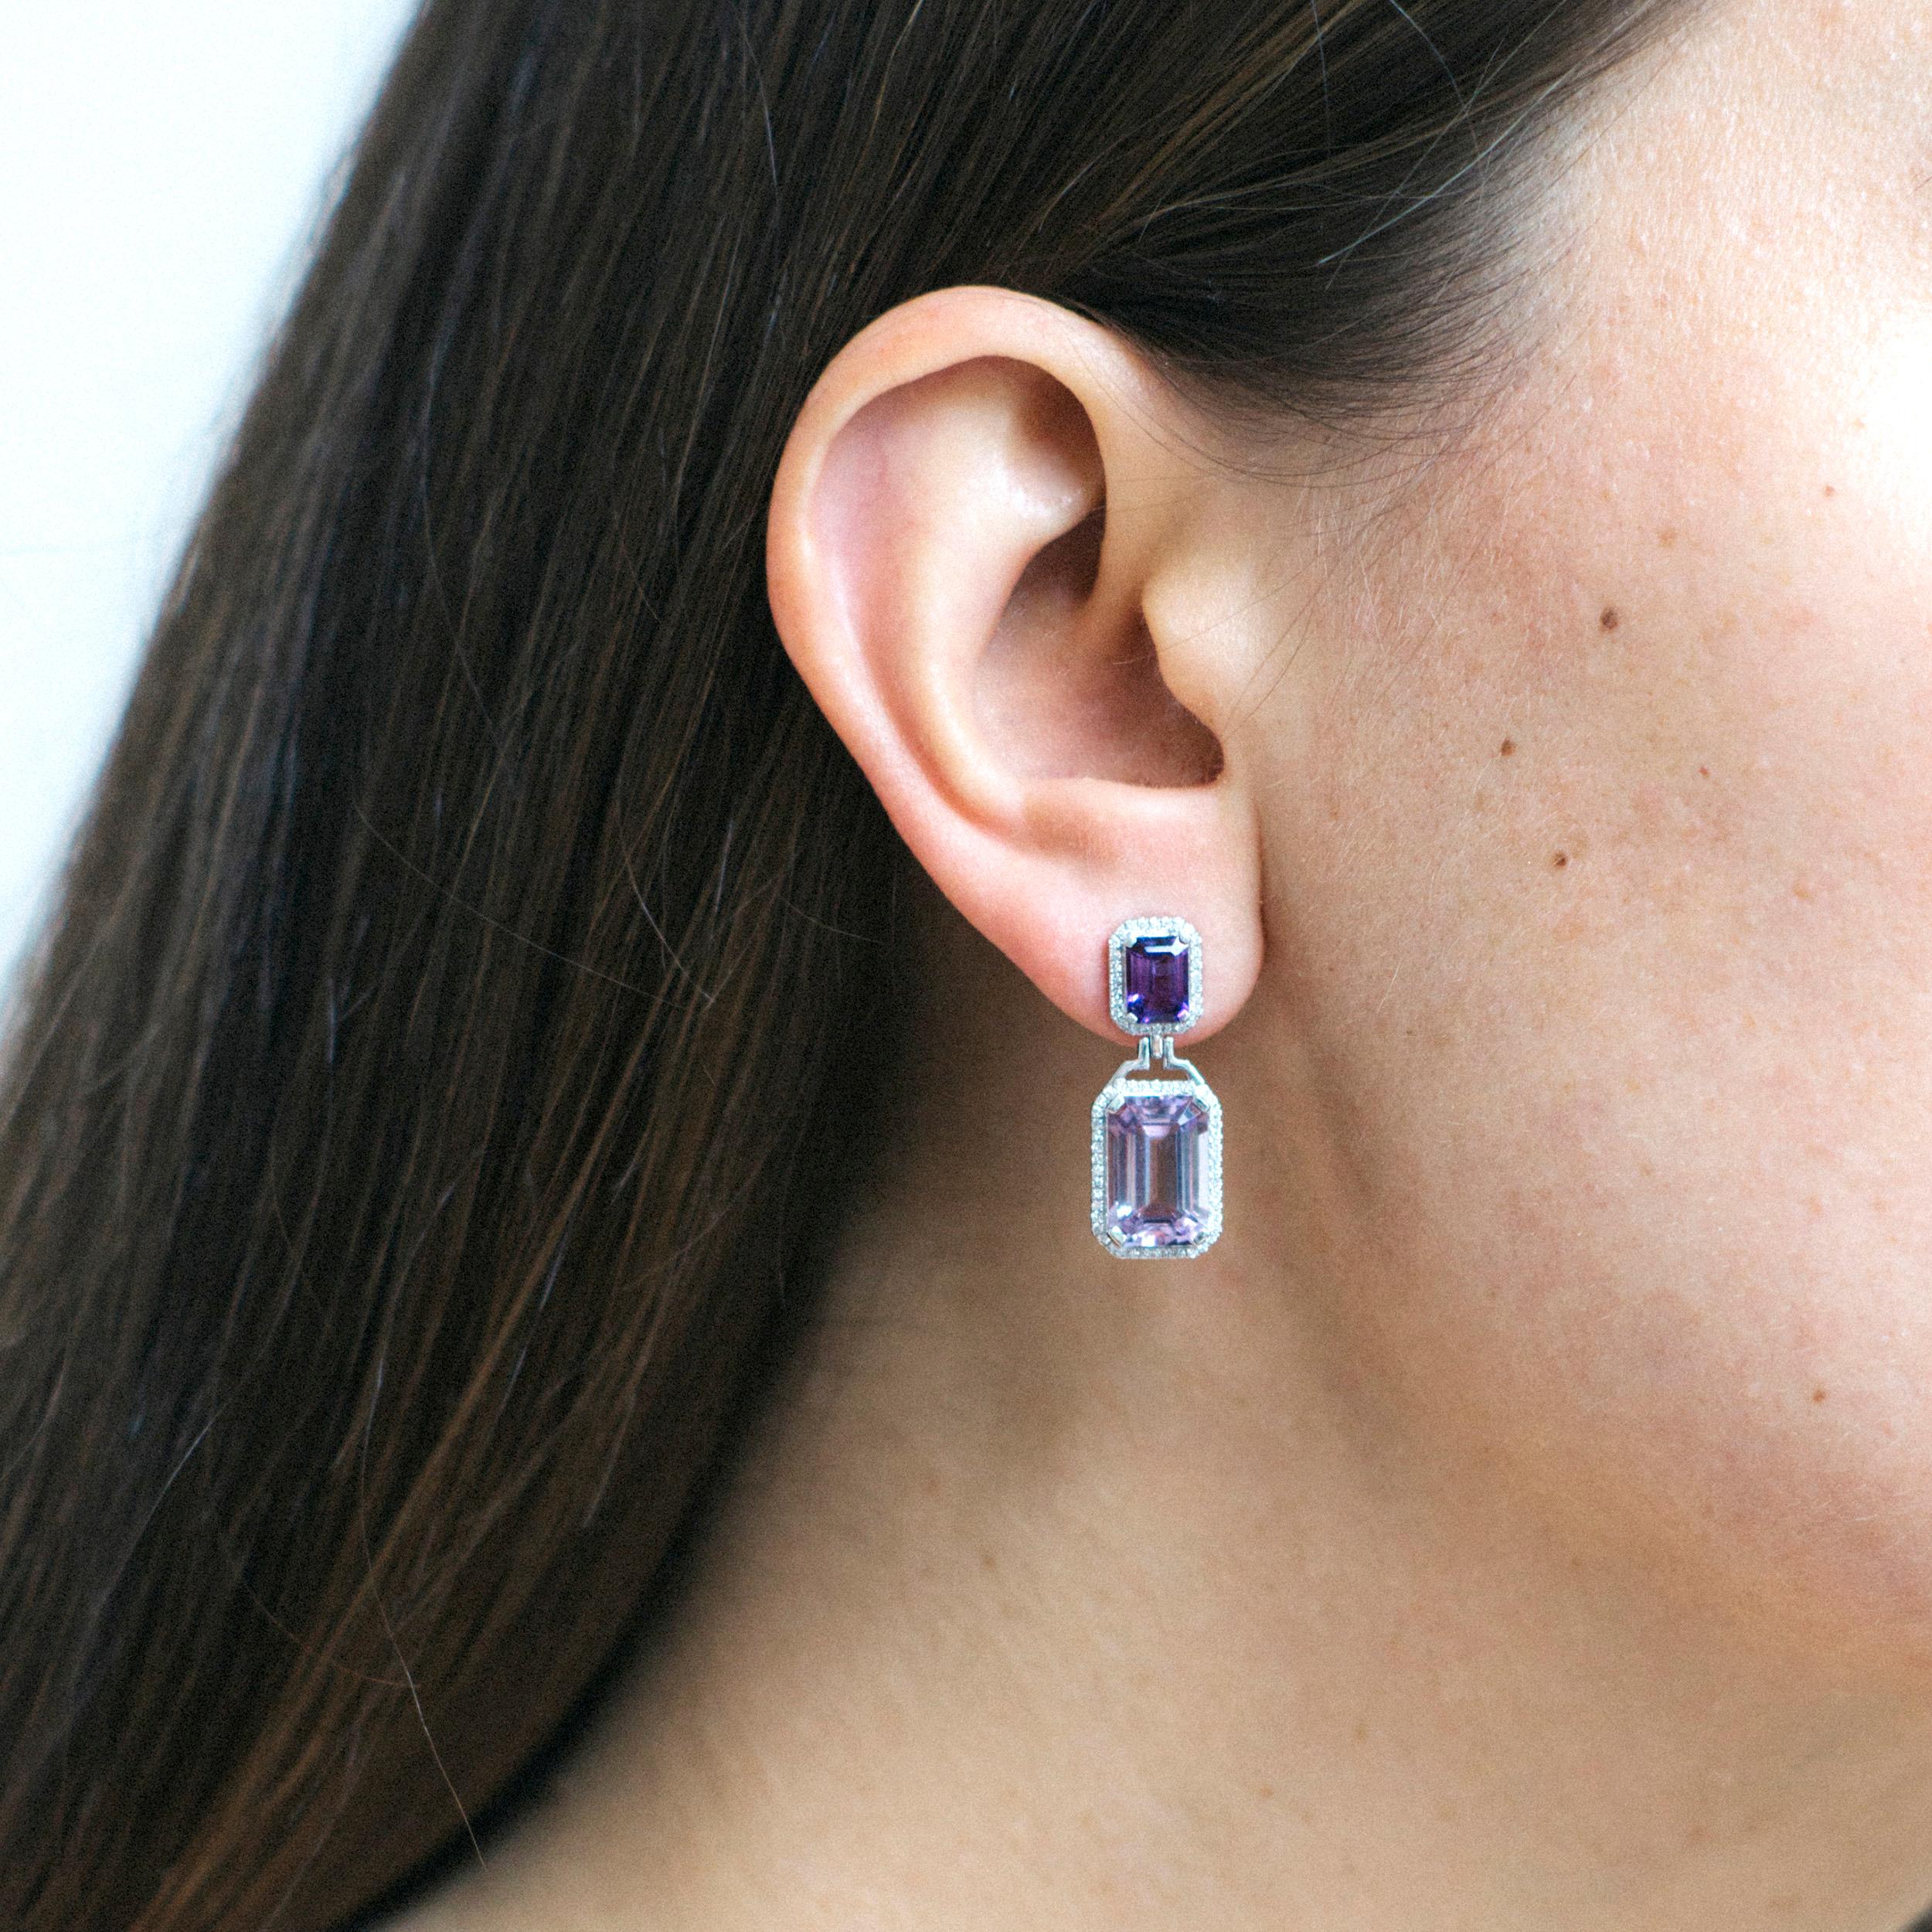 Emerald Cut Lavender Amethyst and Amethyst Earrings in 18k White Gold, from 'Gossip' Collection. Please allow 2-4 weeks for this item to be delivered.

Stone Size: 12 x 8 mm & 7 x 5 mm

Diamonds: G-H / VS, Approx. Wt: 0.40 Cts